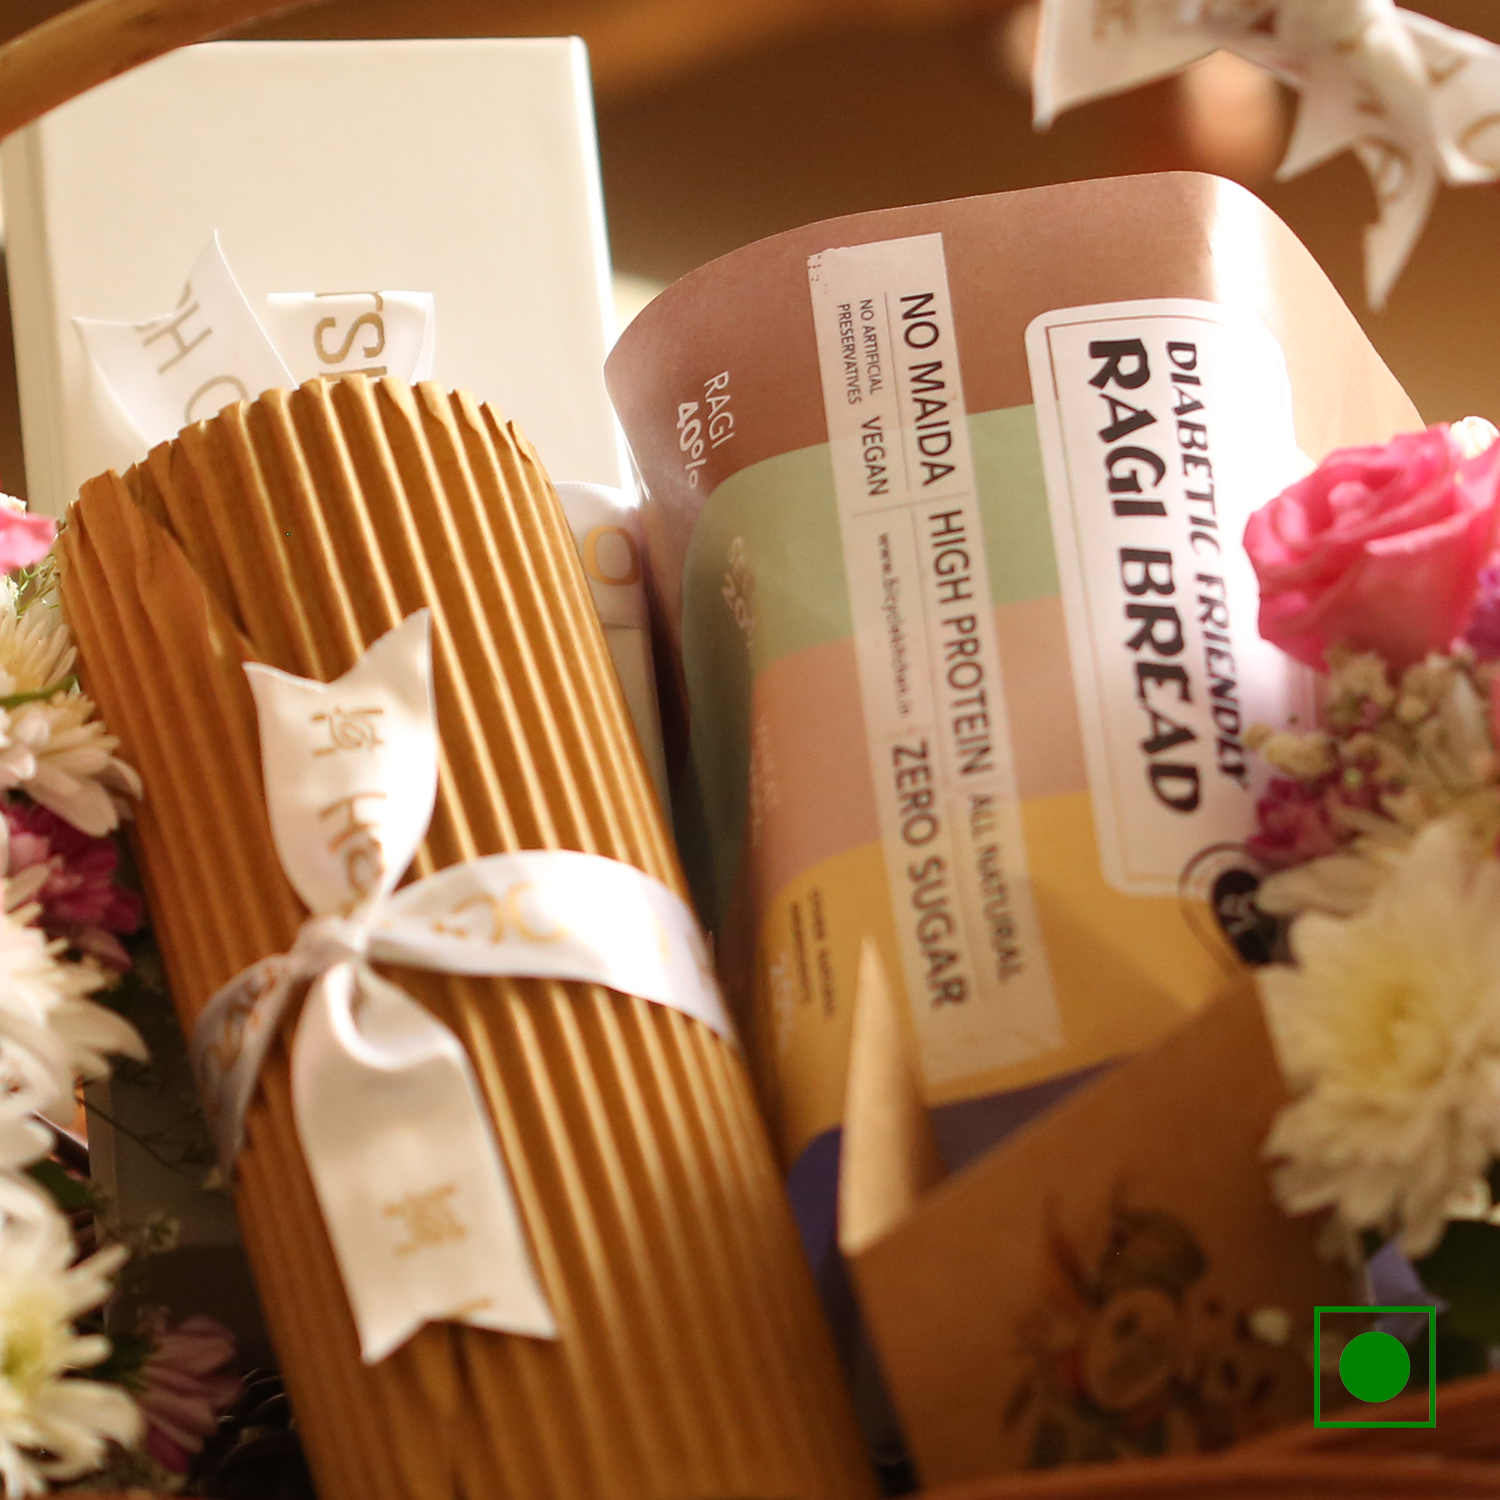 Send Flowers to Andheri East, Mumbai Online | Flower Delivery Today!